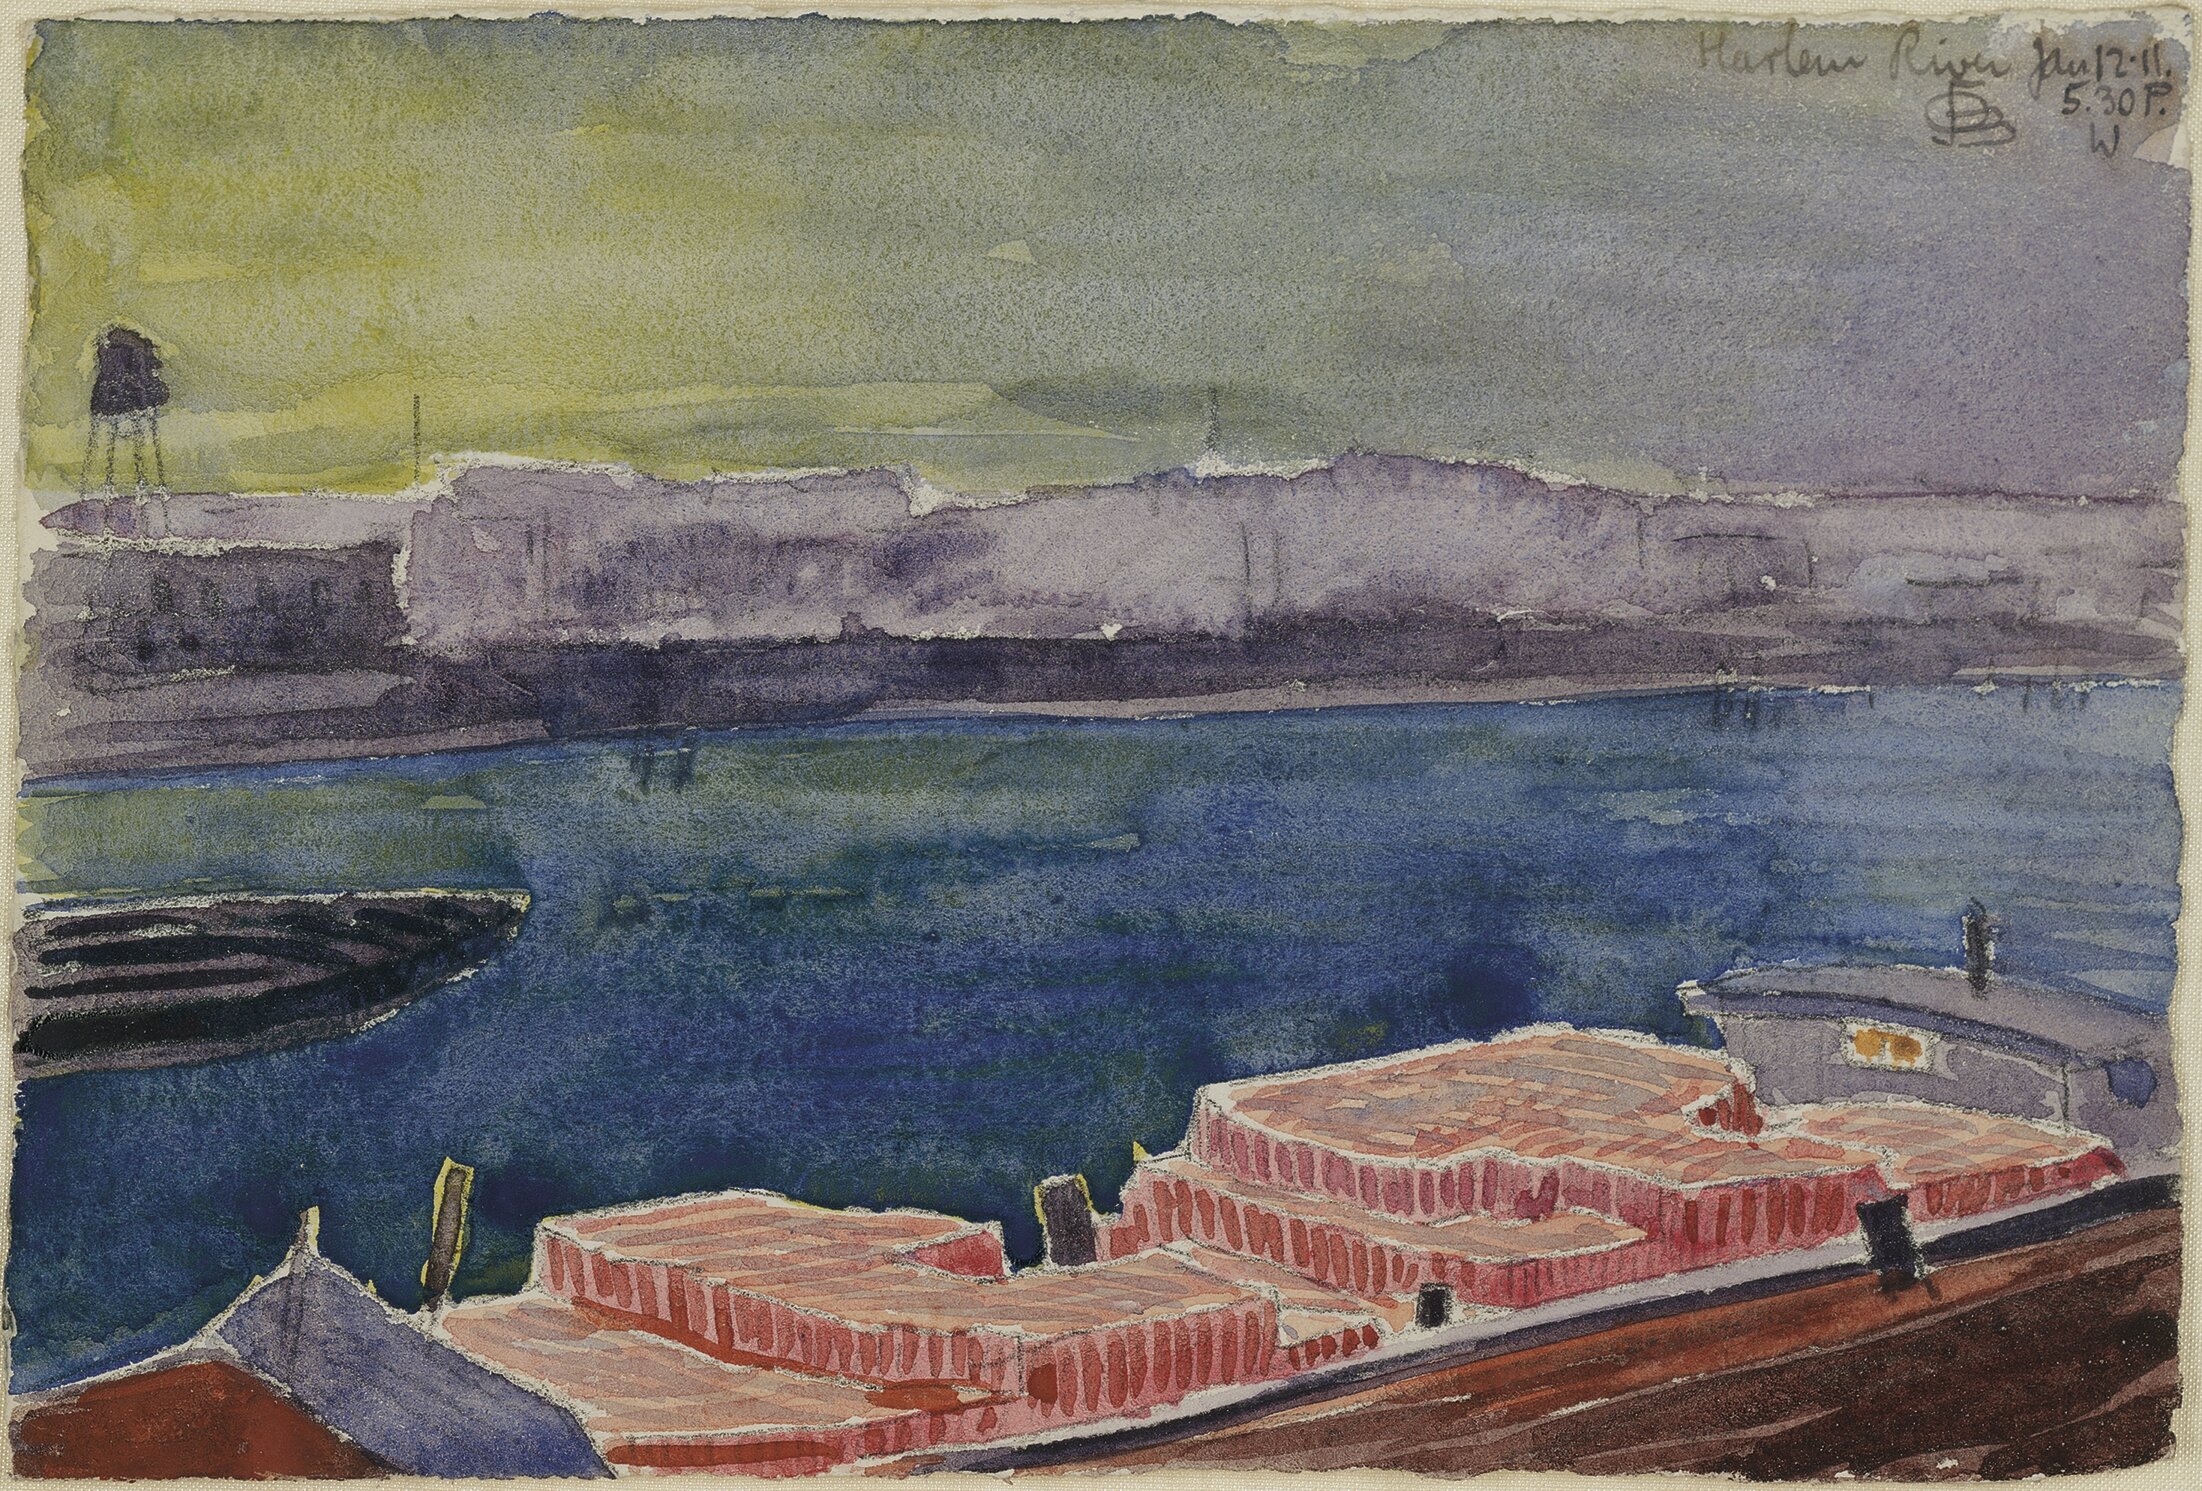 painting of river with cityscape in the background and shipping containers on a boat in the foreground